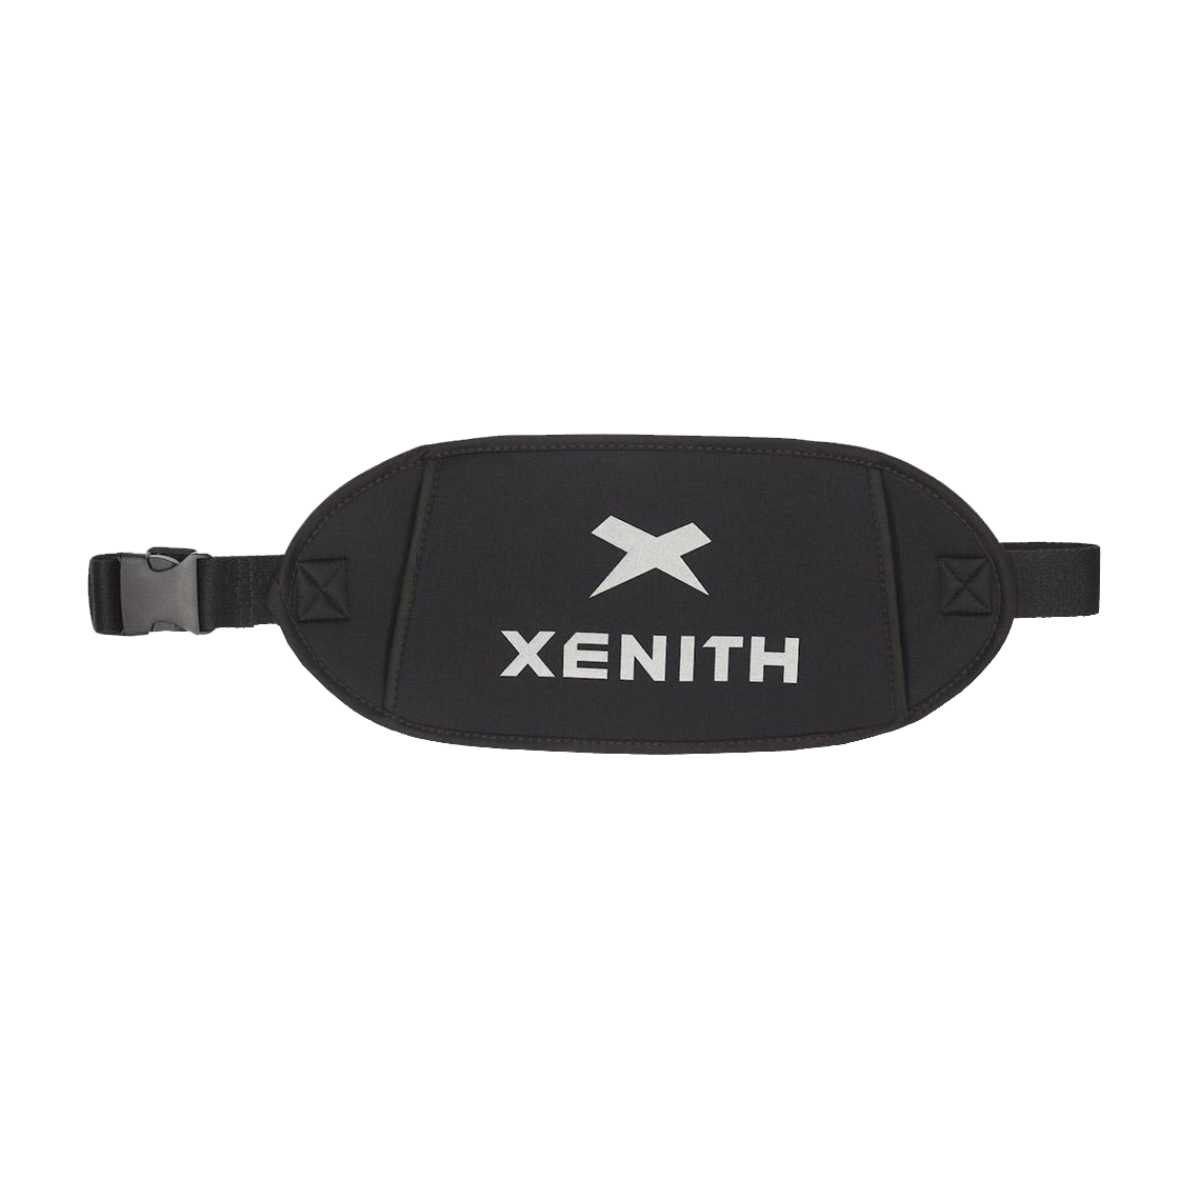 Front facing view of black Xenith hand warmer with white logo.